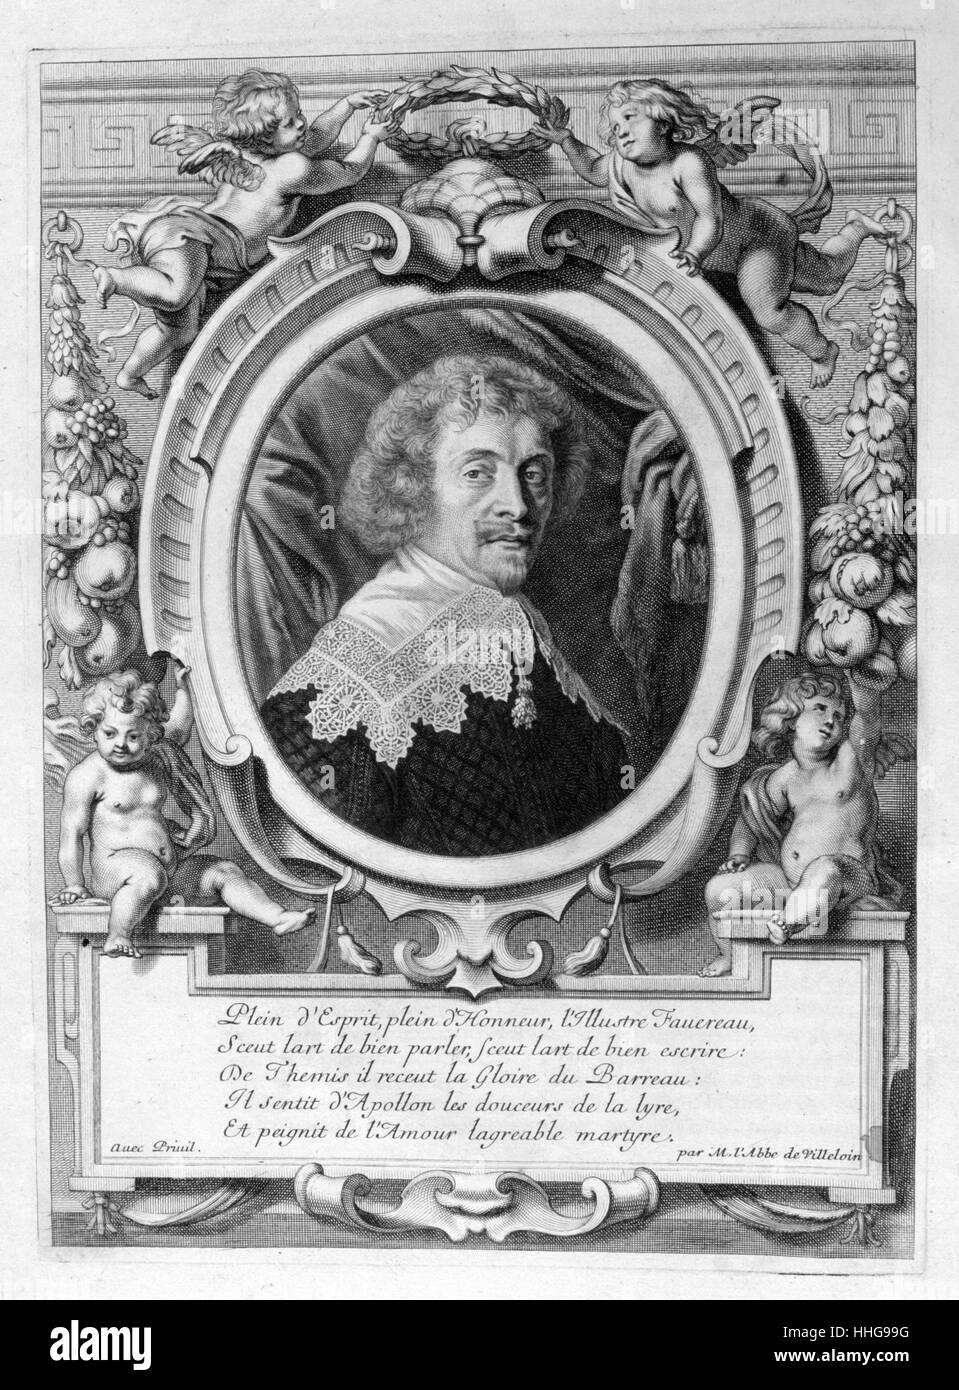 M. Favereau a seventeenth century advisor to the French royal court. Engraving from 'Tableaux du temple des muses' (1655) by Michel de Marolles (1600 - 1681), known as the abbé de Marolles; a French churchman and translator. Stock Photo